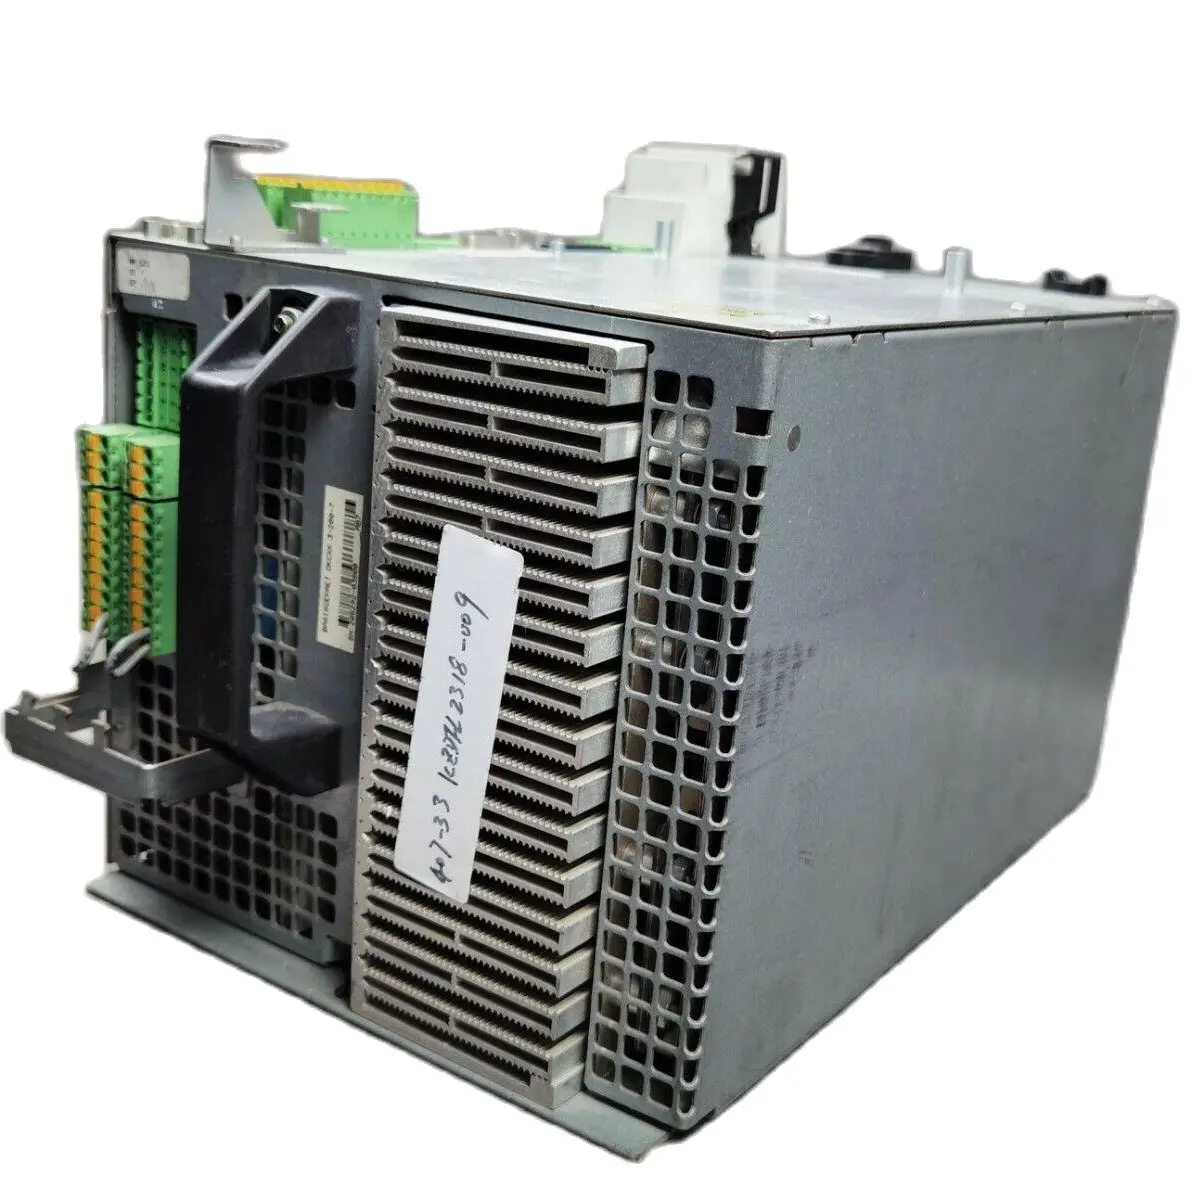 

USED DKC11.3-200-7-FW Servo Drives in stock